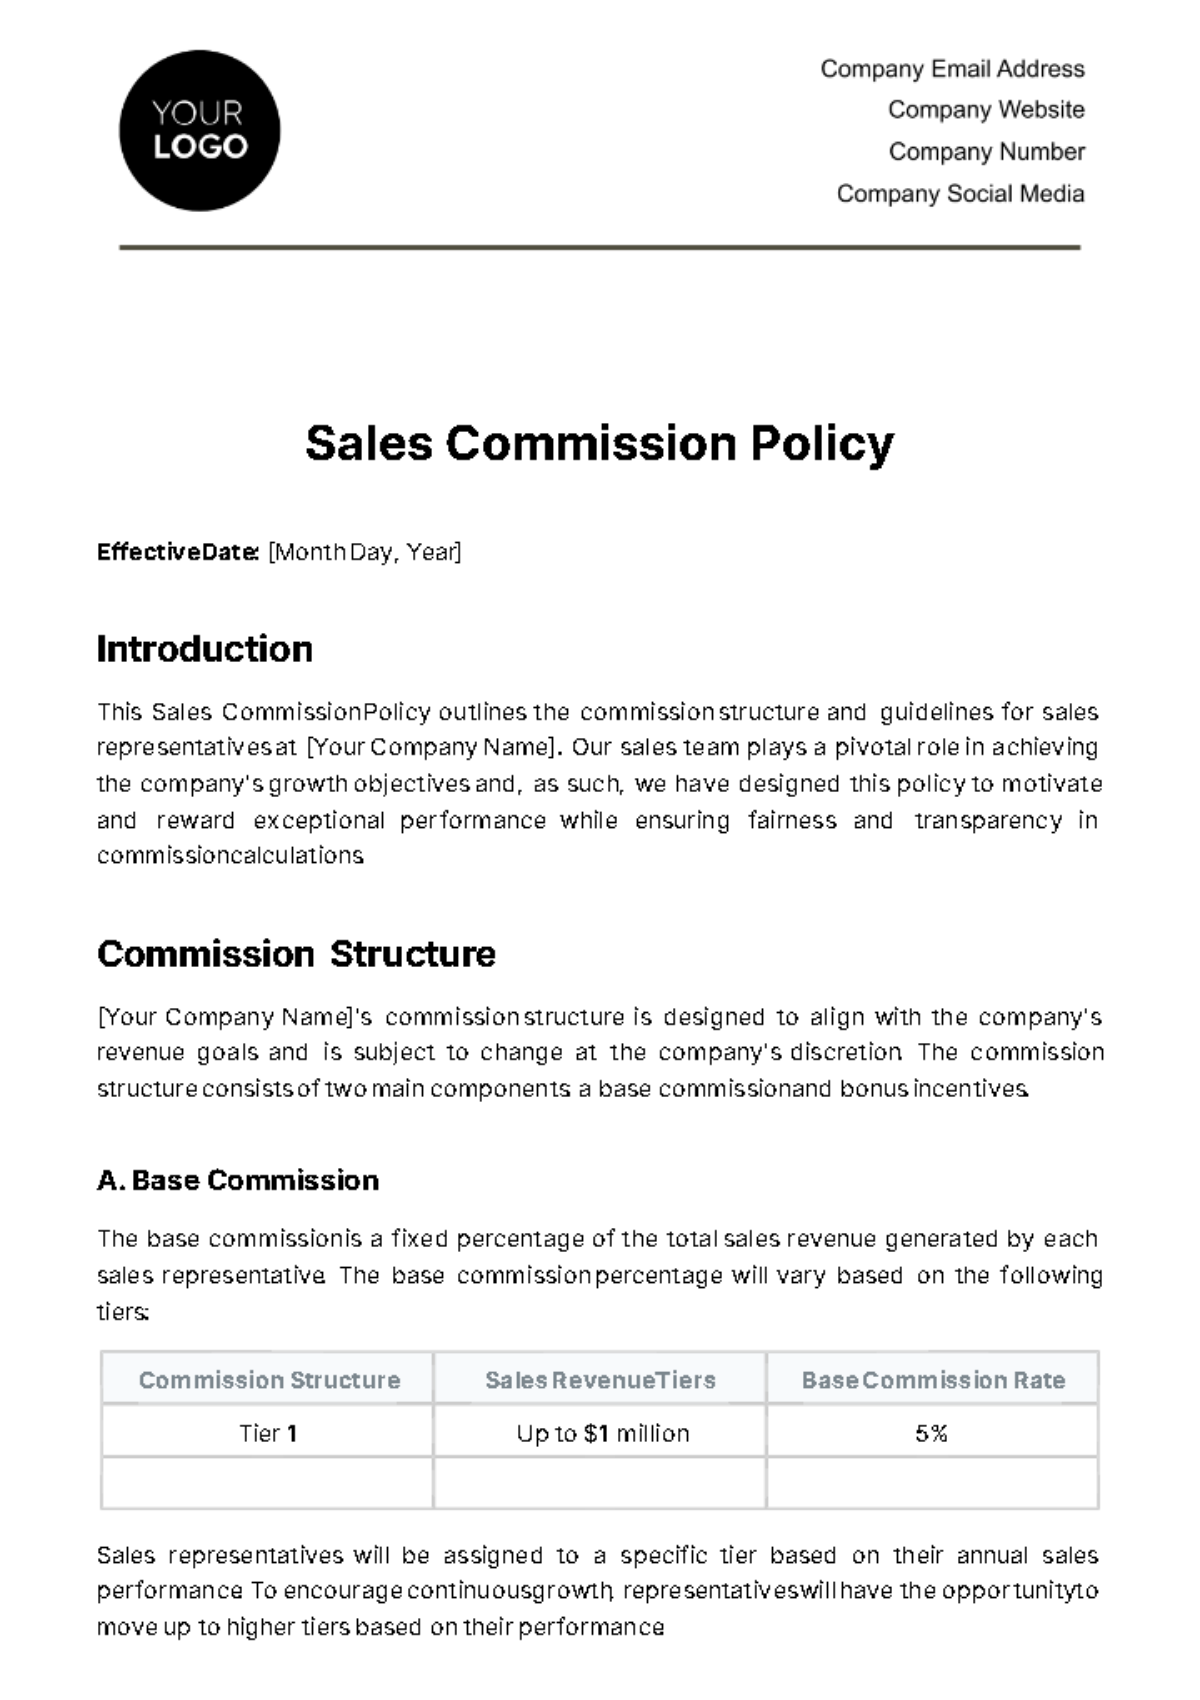 Sales Commission Policy Template